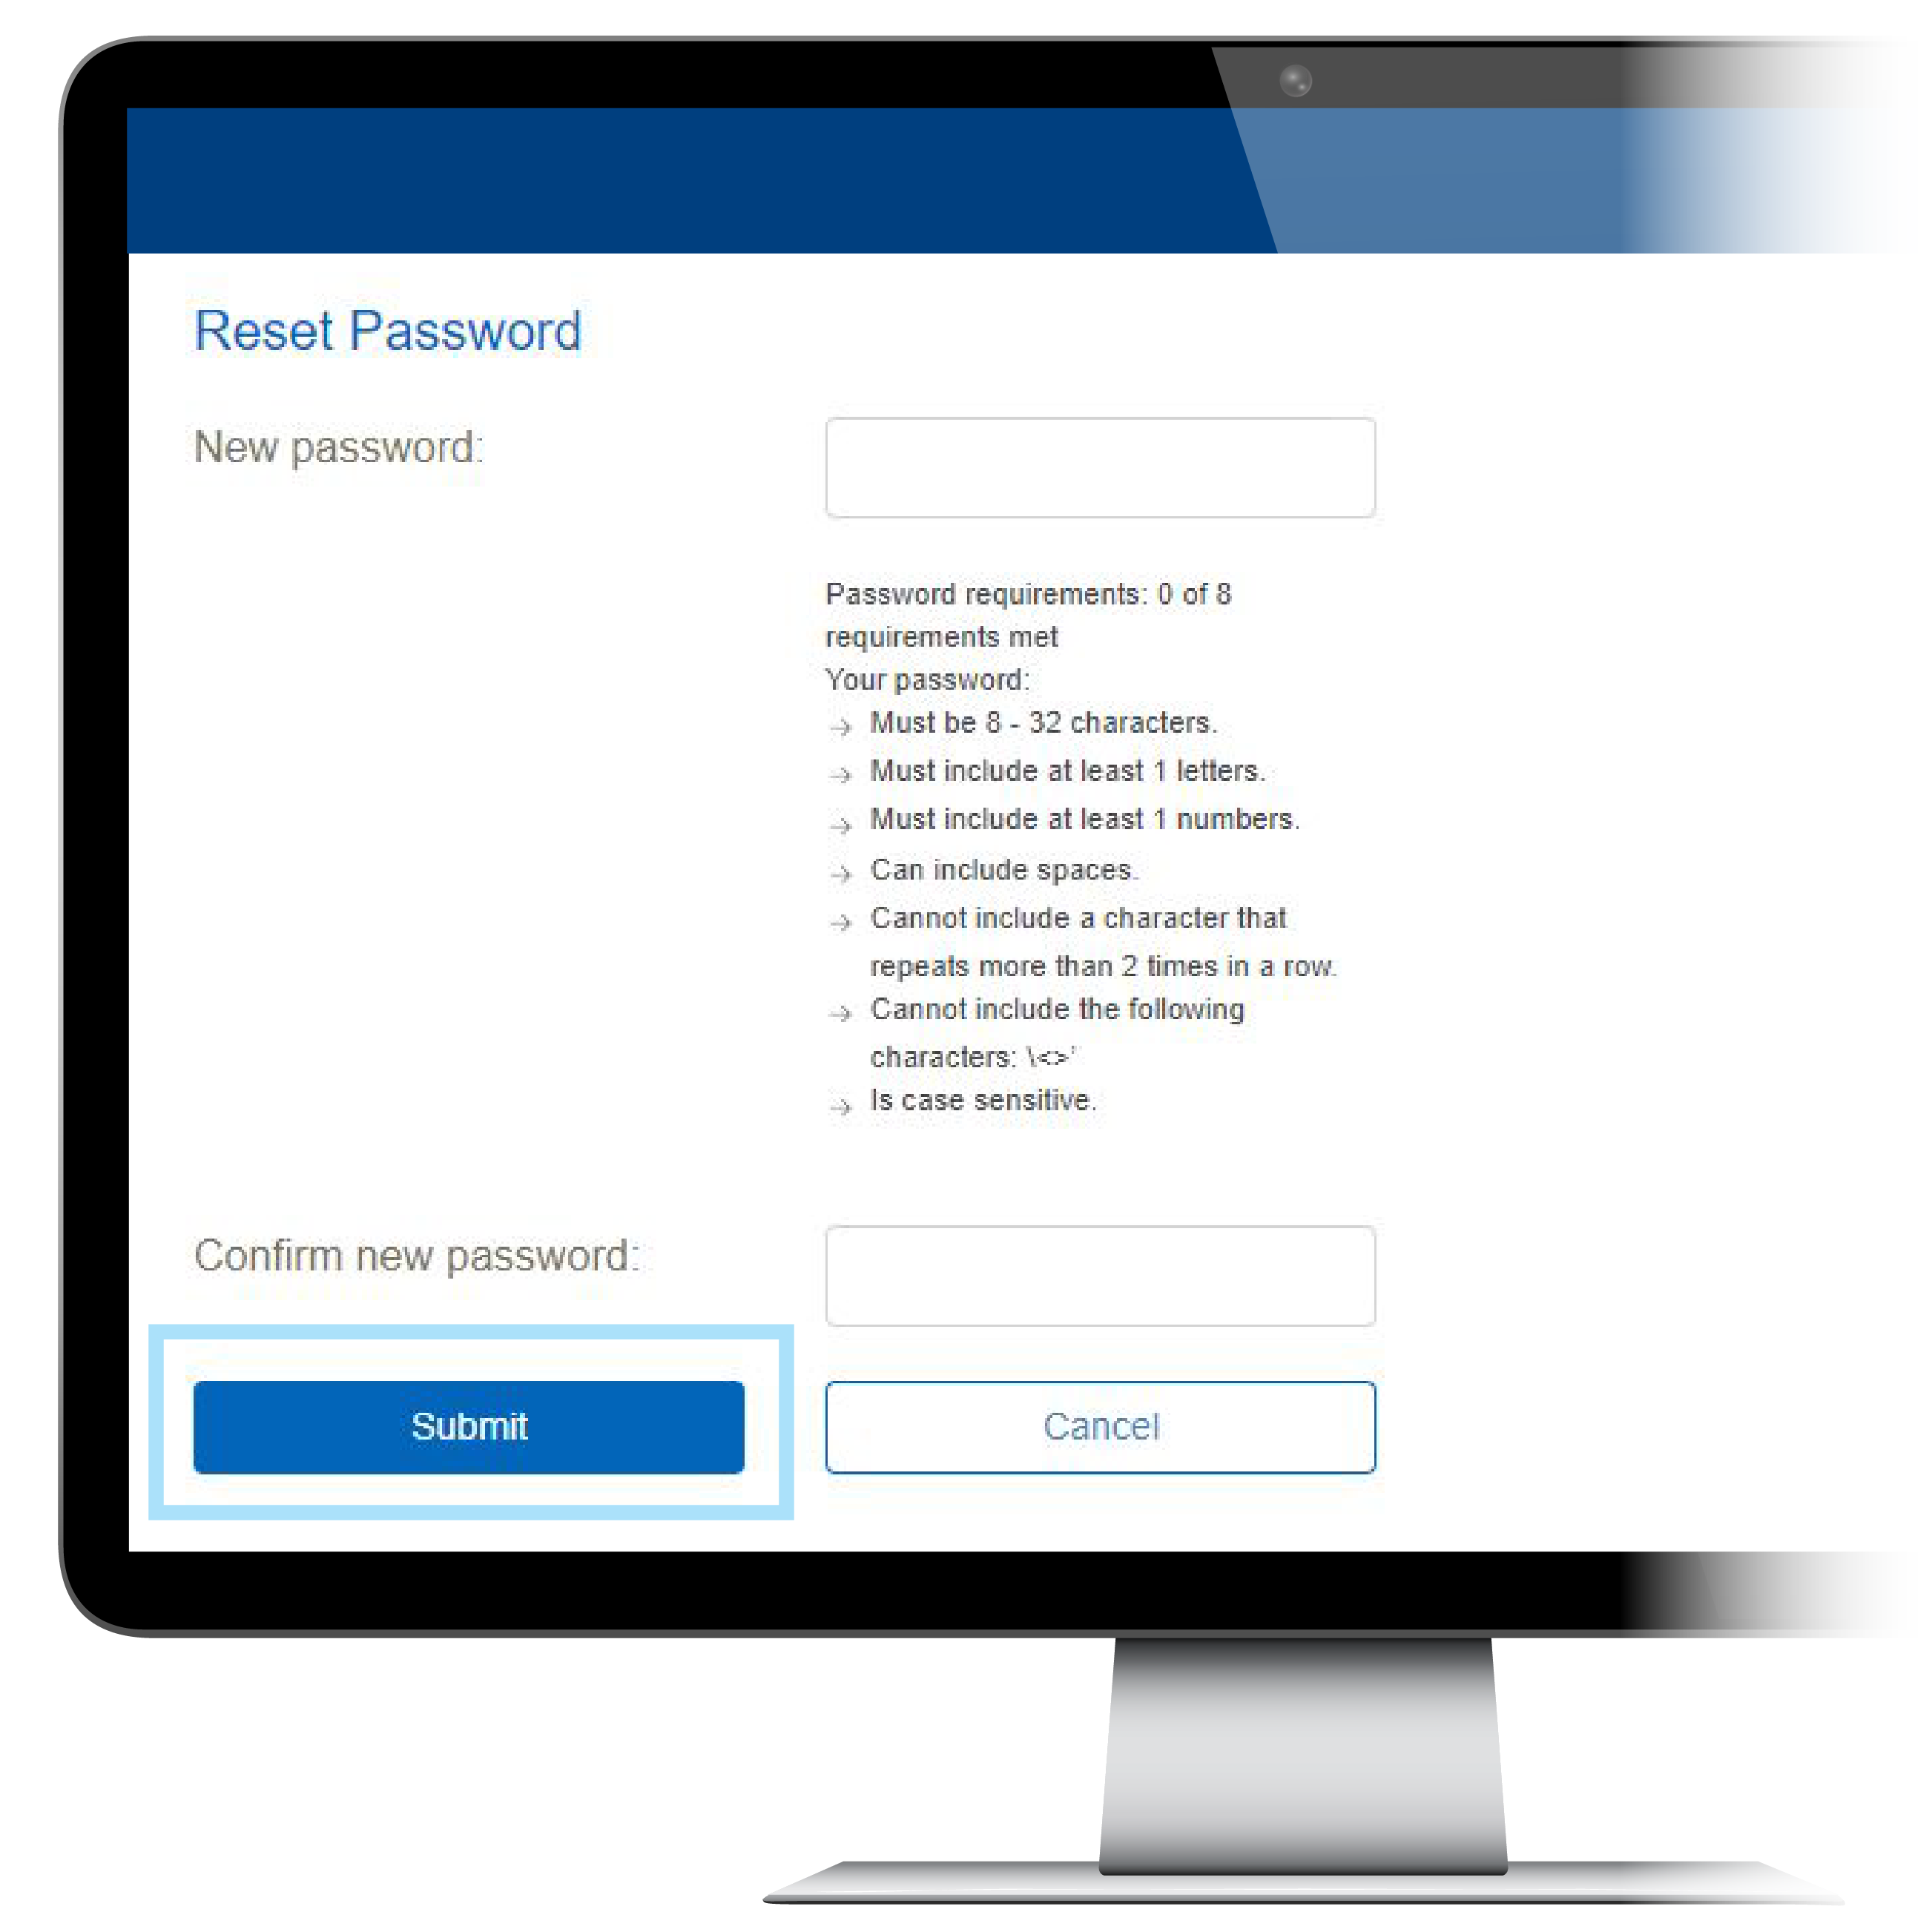 Create and confirm your new password, and select “Submit.”